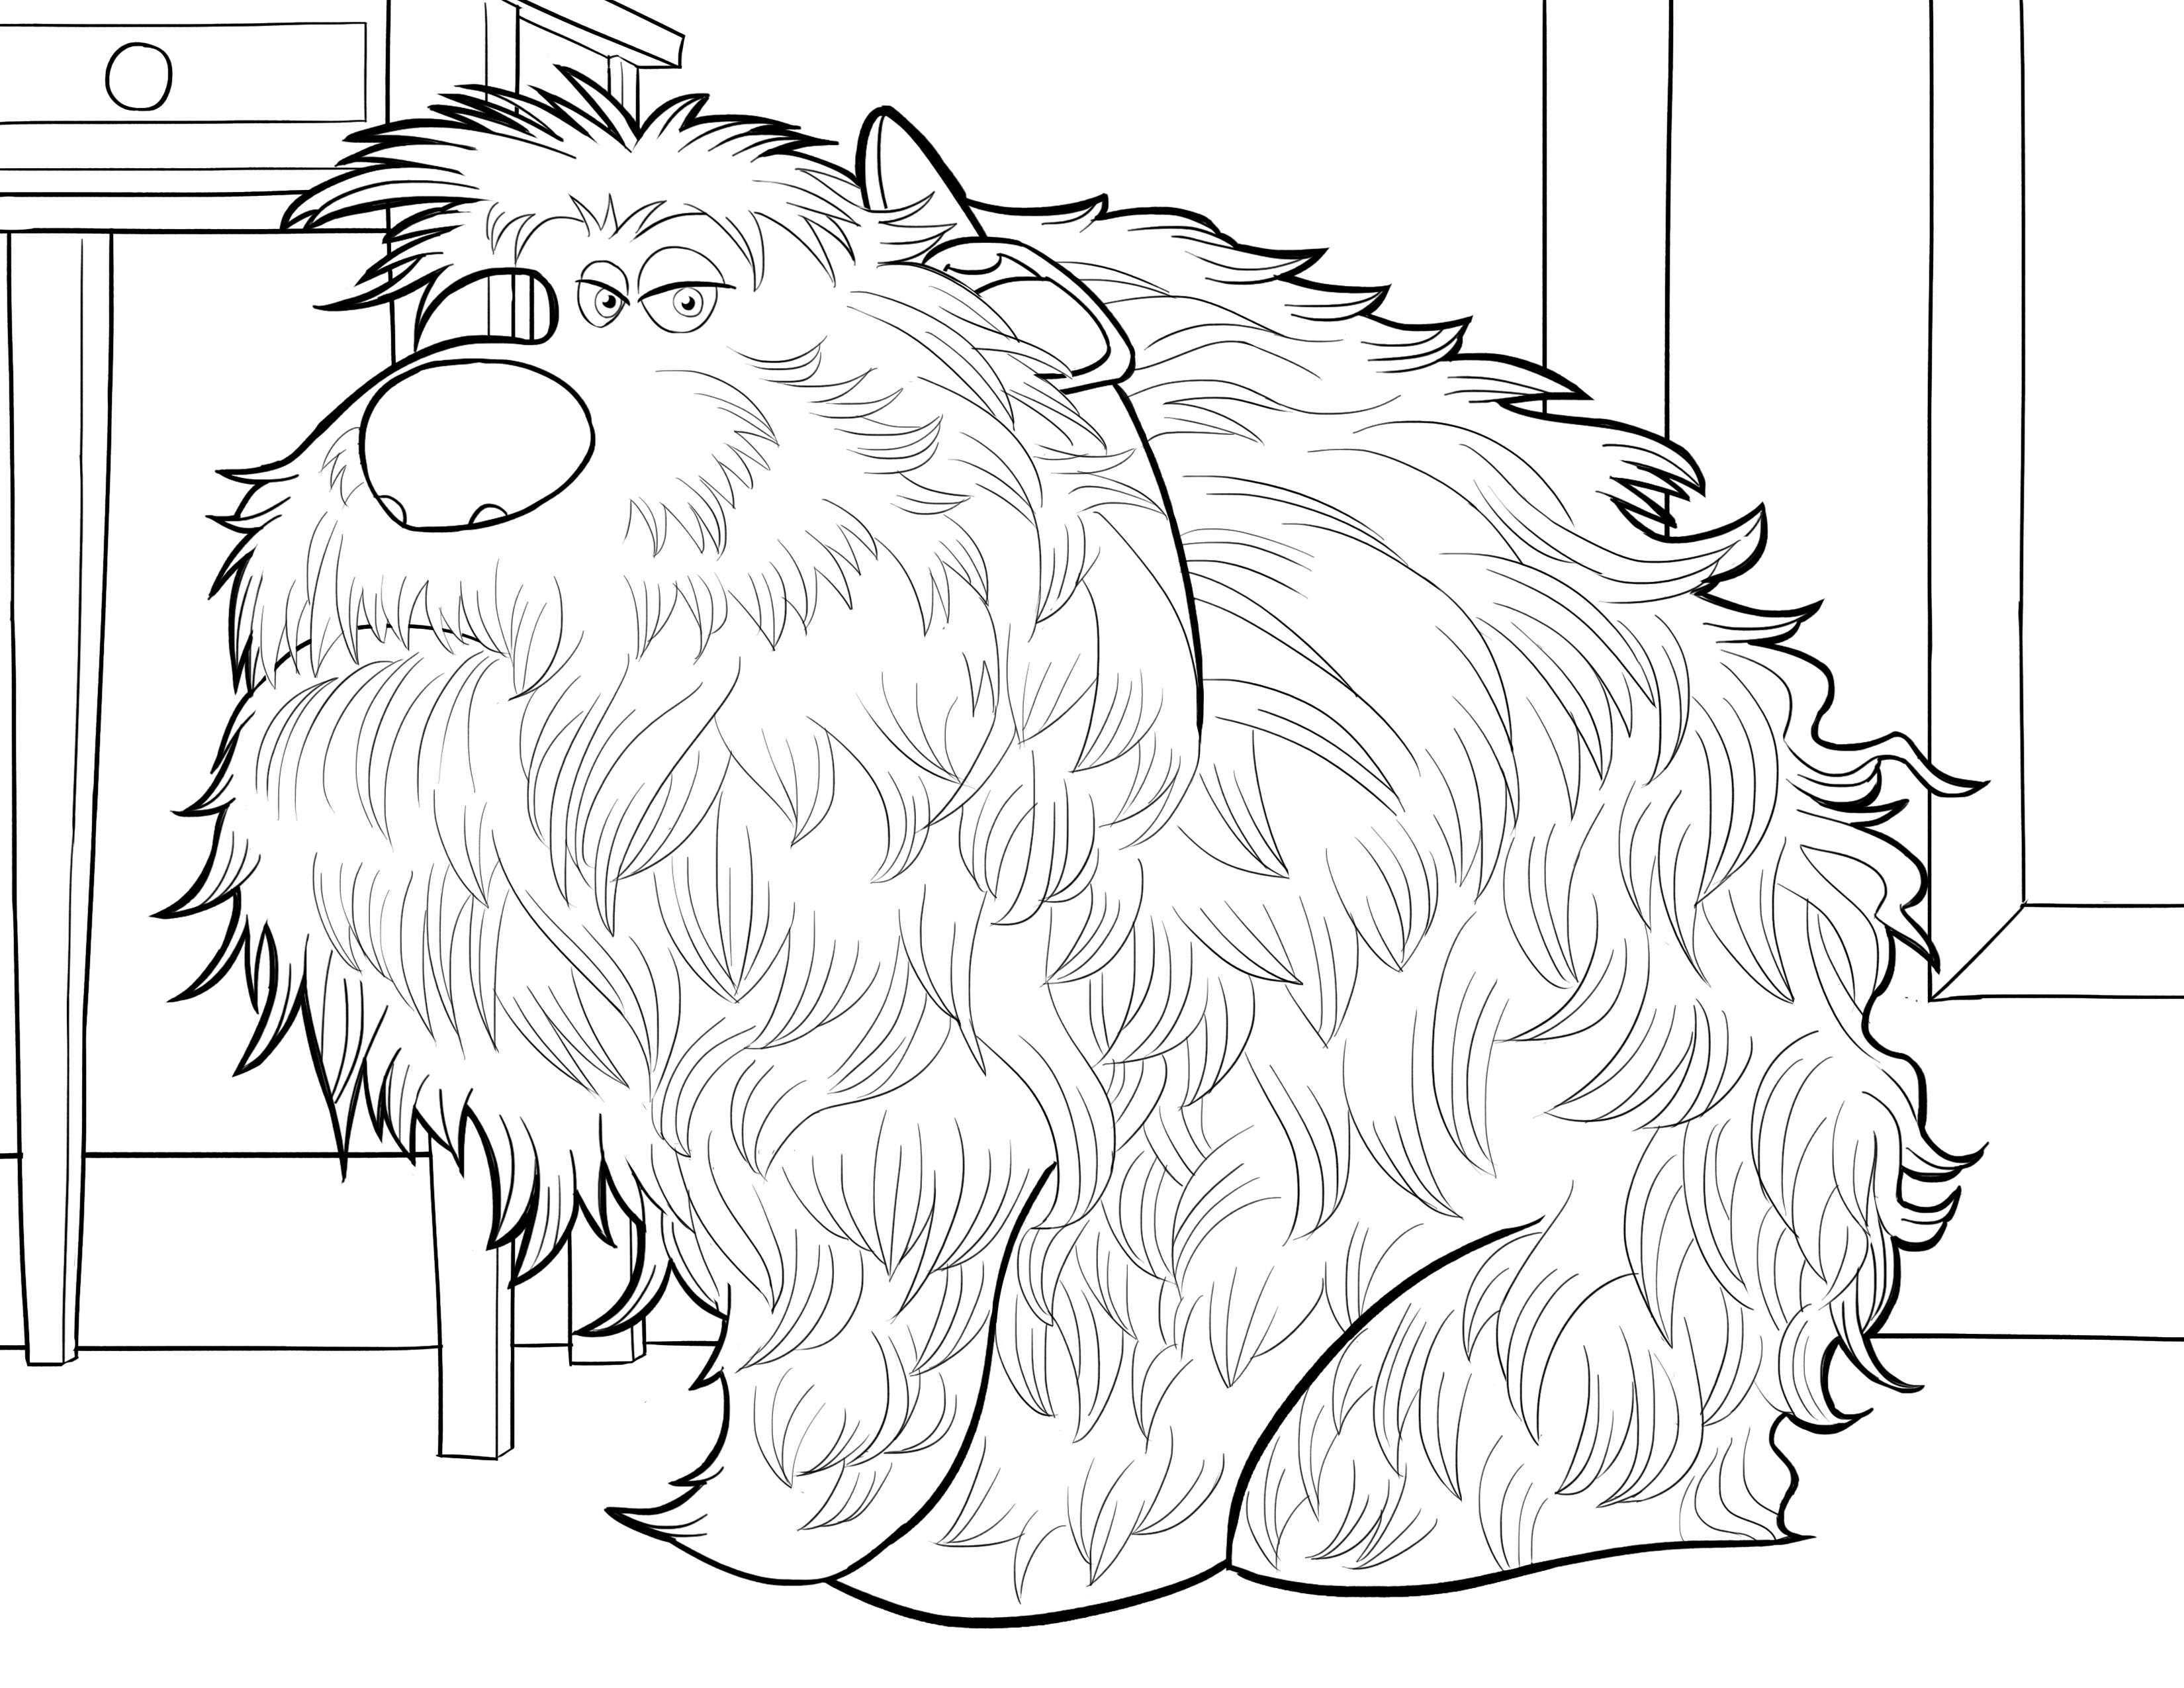 Coloring A big and fluffy dog. Category Pets allowed. Tags:  the dog.